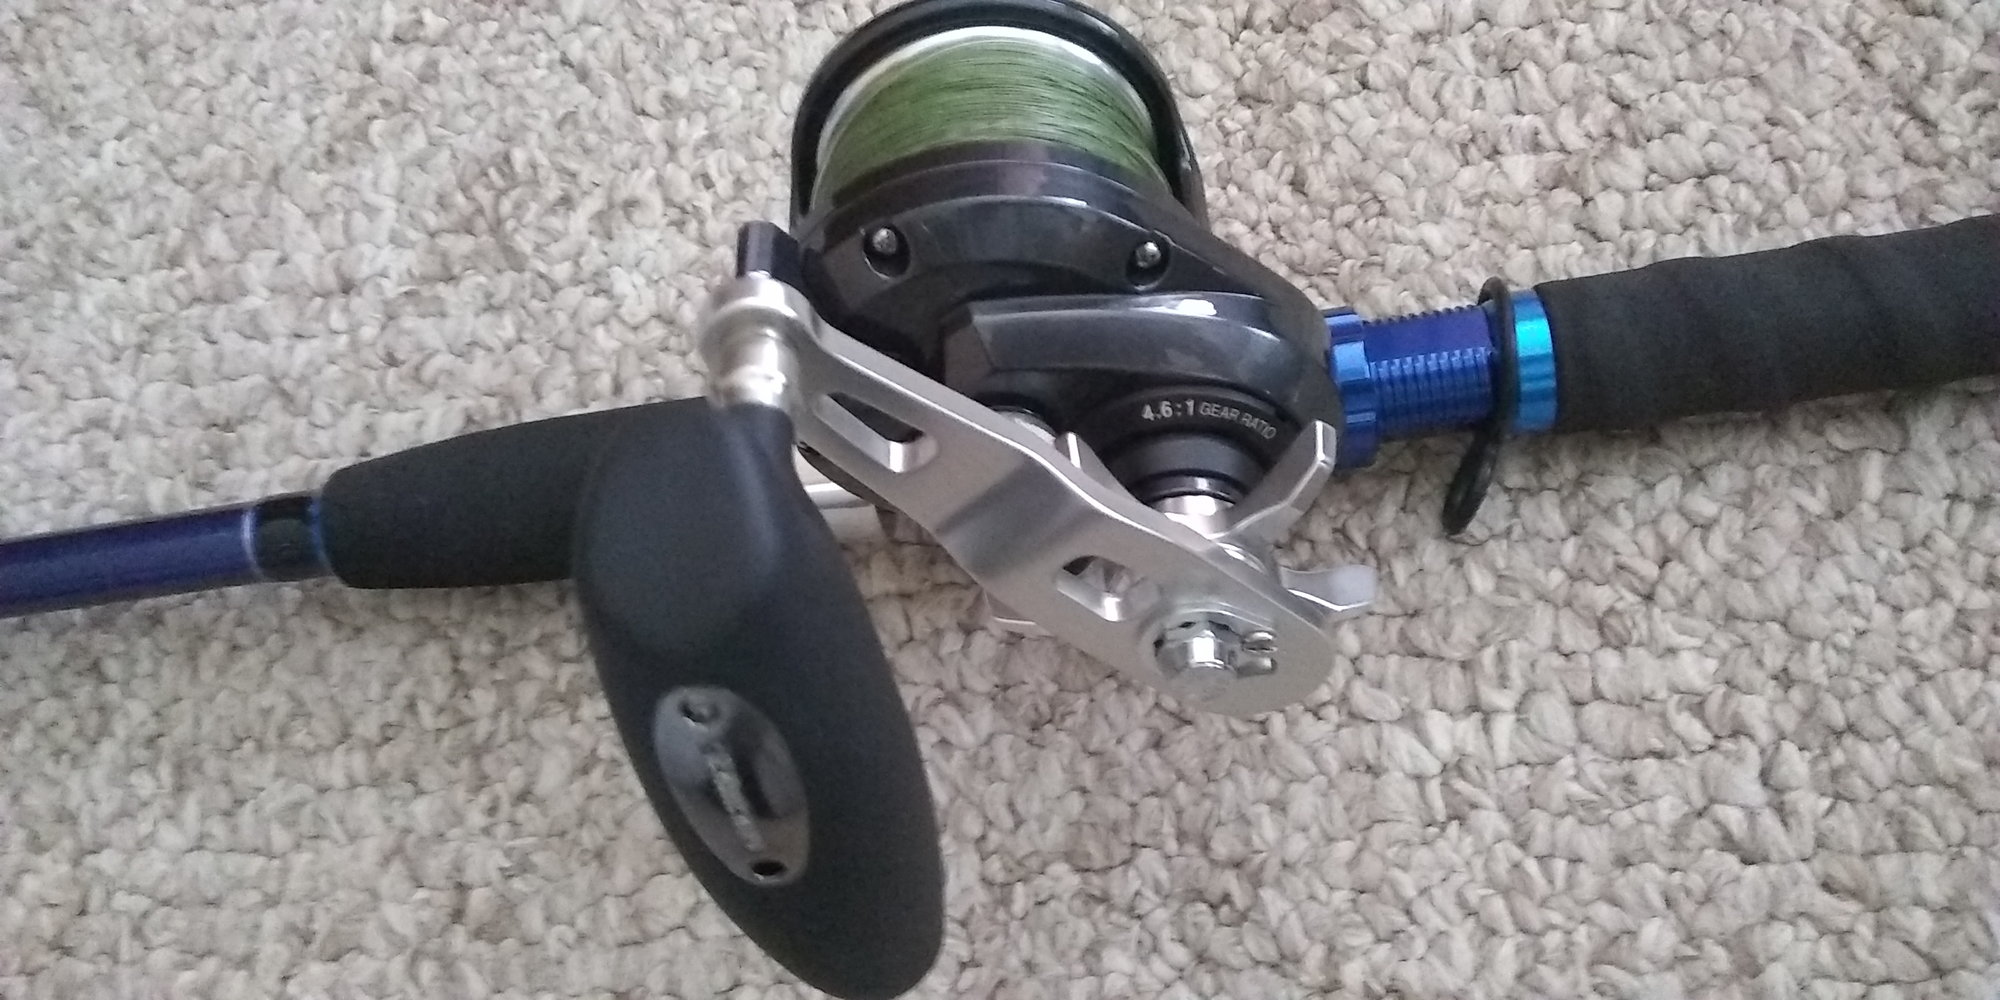 Best bottom fishing reels/rods - The Hull Truth - Boating and